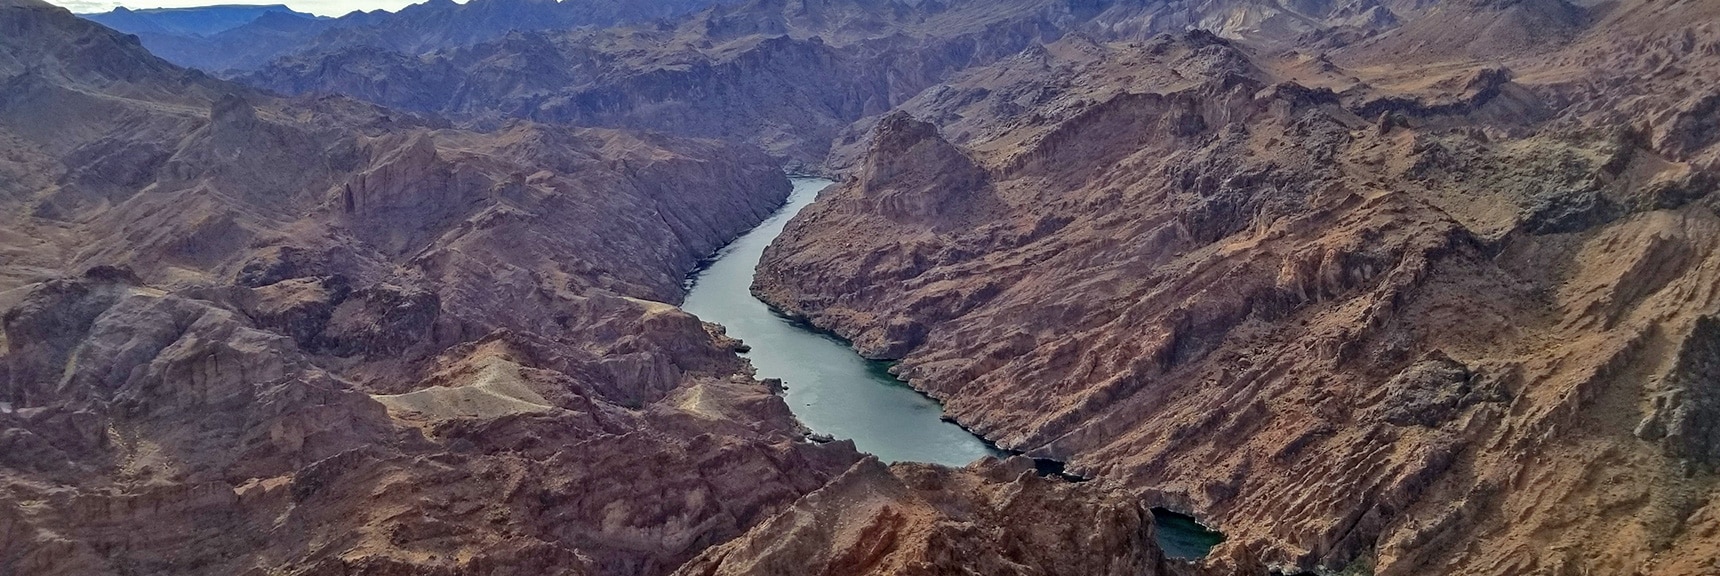 Southern View of Colorado River from Overlook | Arizona Hot Spring | Liberty Bell Arch | Lake Mead National Recreation Area, Arizona